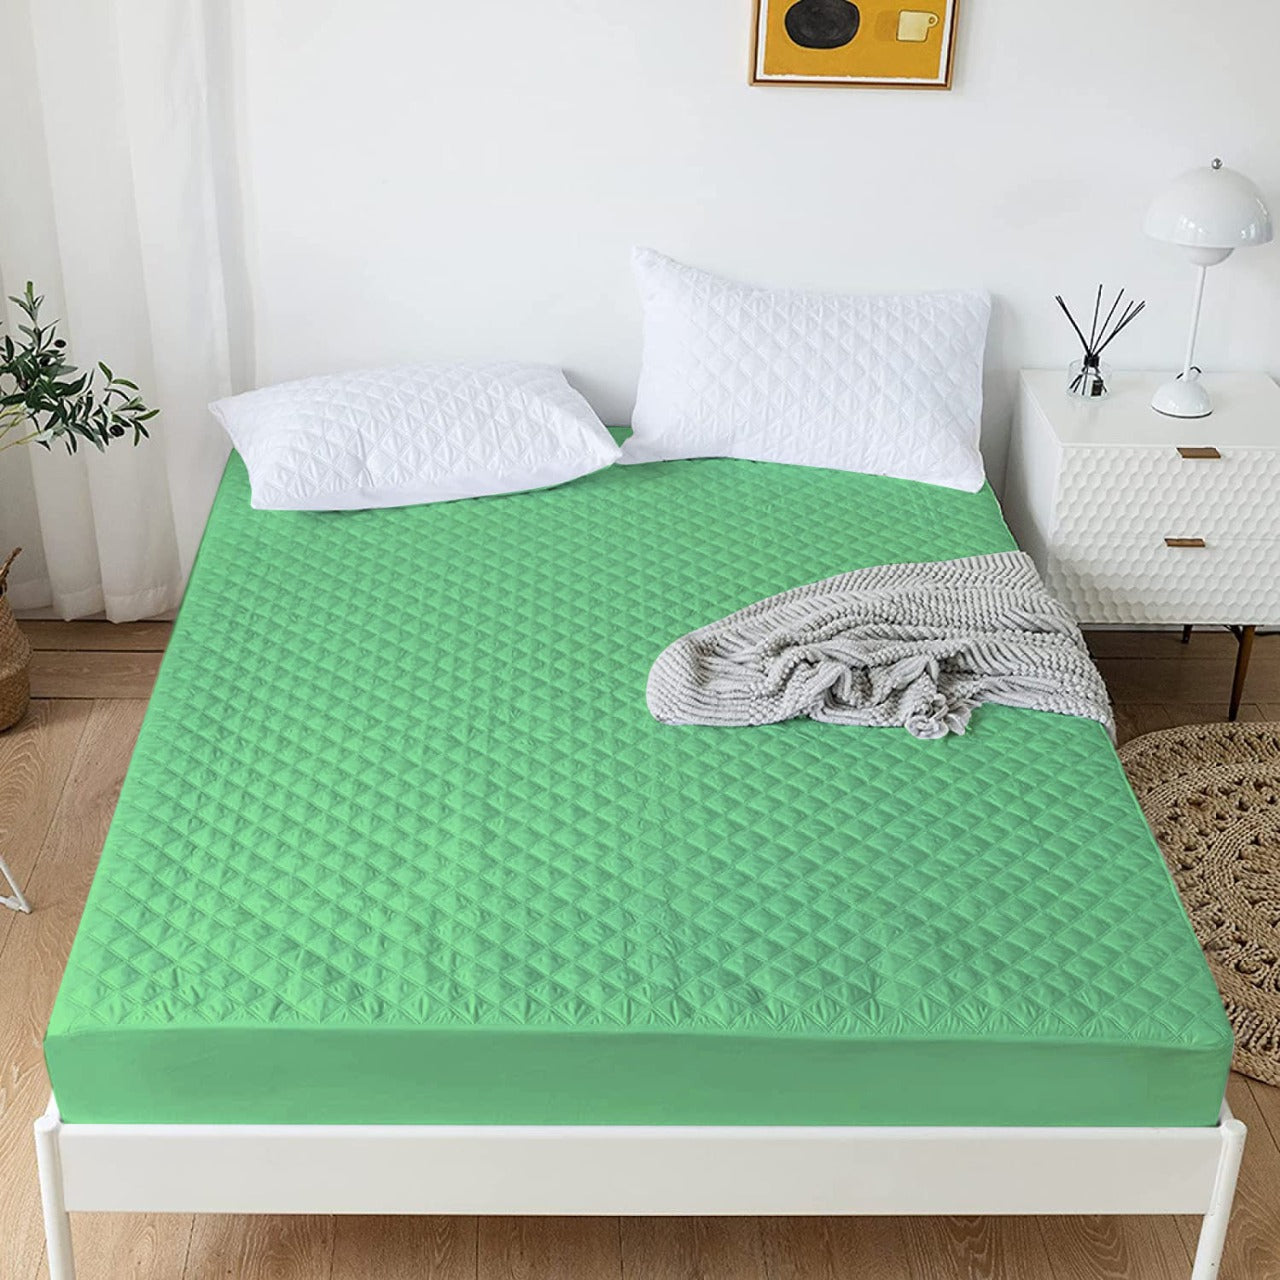 Quilted Waterproof Mattress Protector-Powder Green Apricot